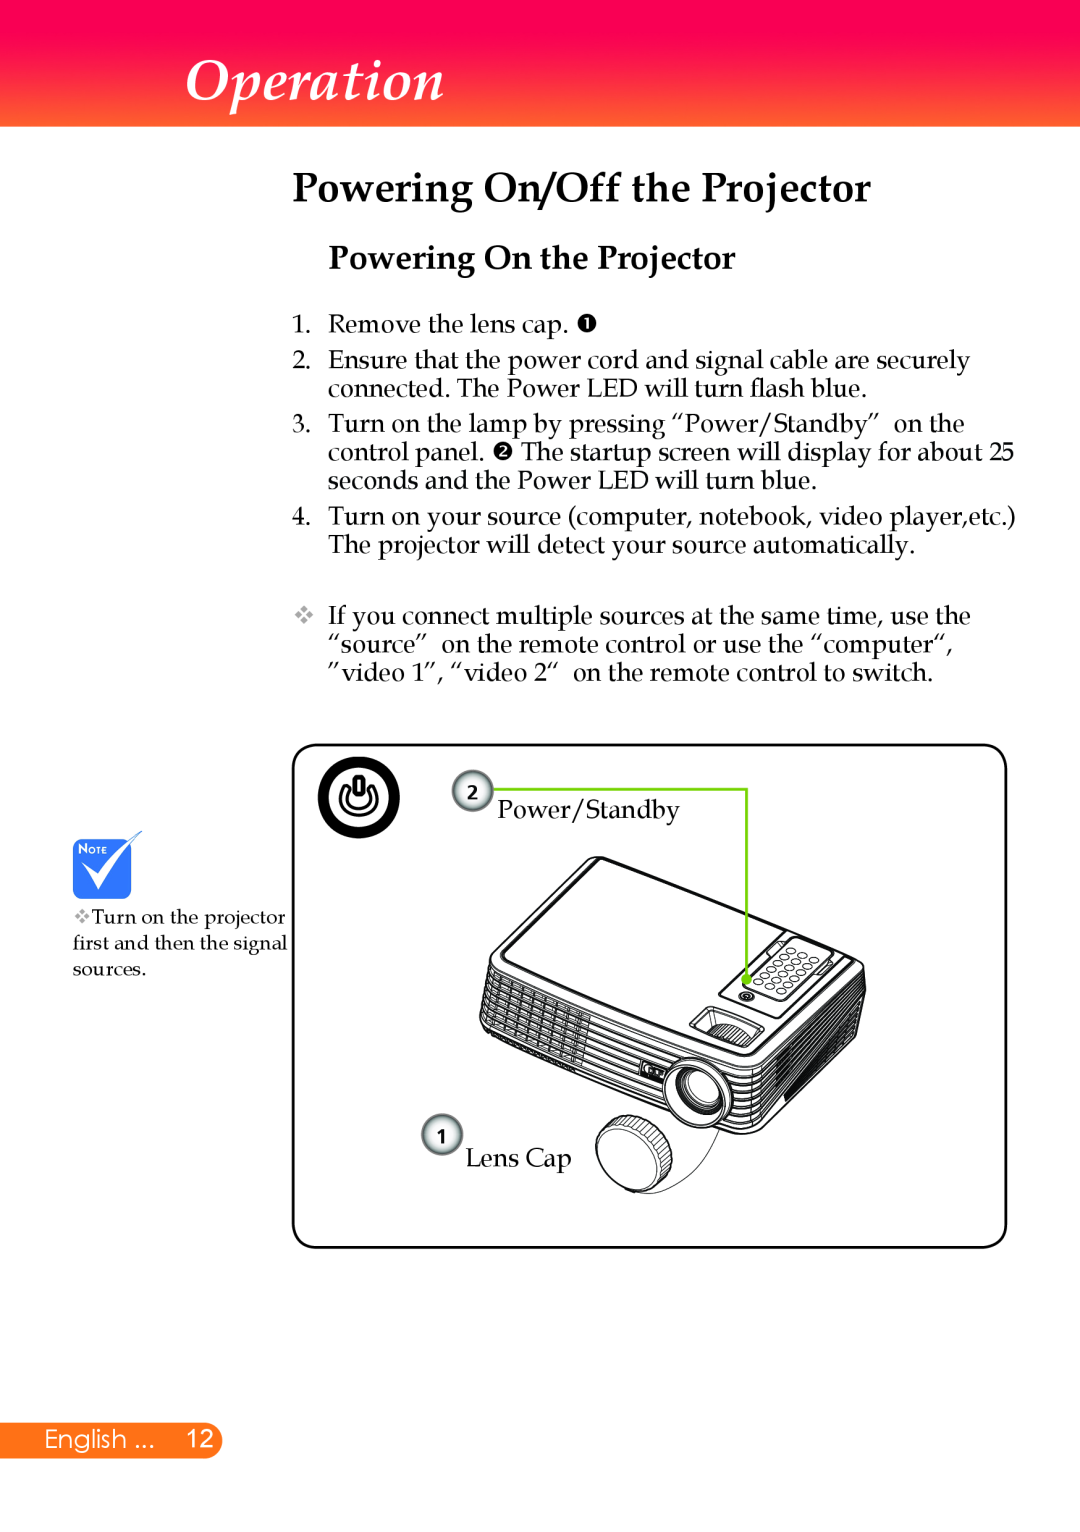 InFocus X7, X6 manual Powering On/Off the Projector, Powering On the Projector, Operation, English 